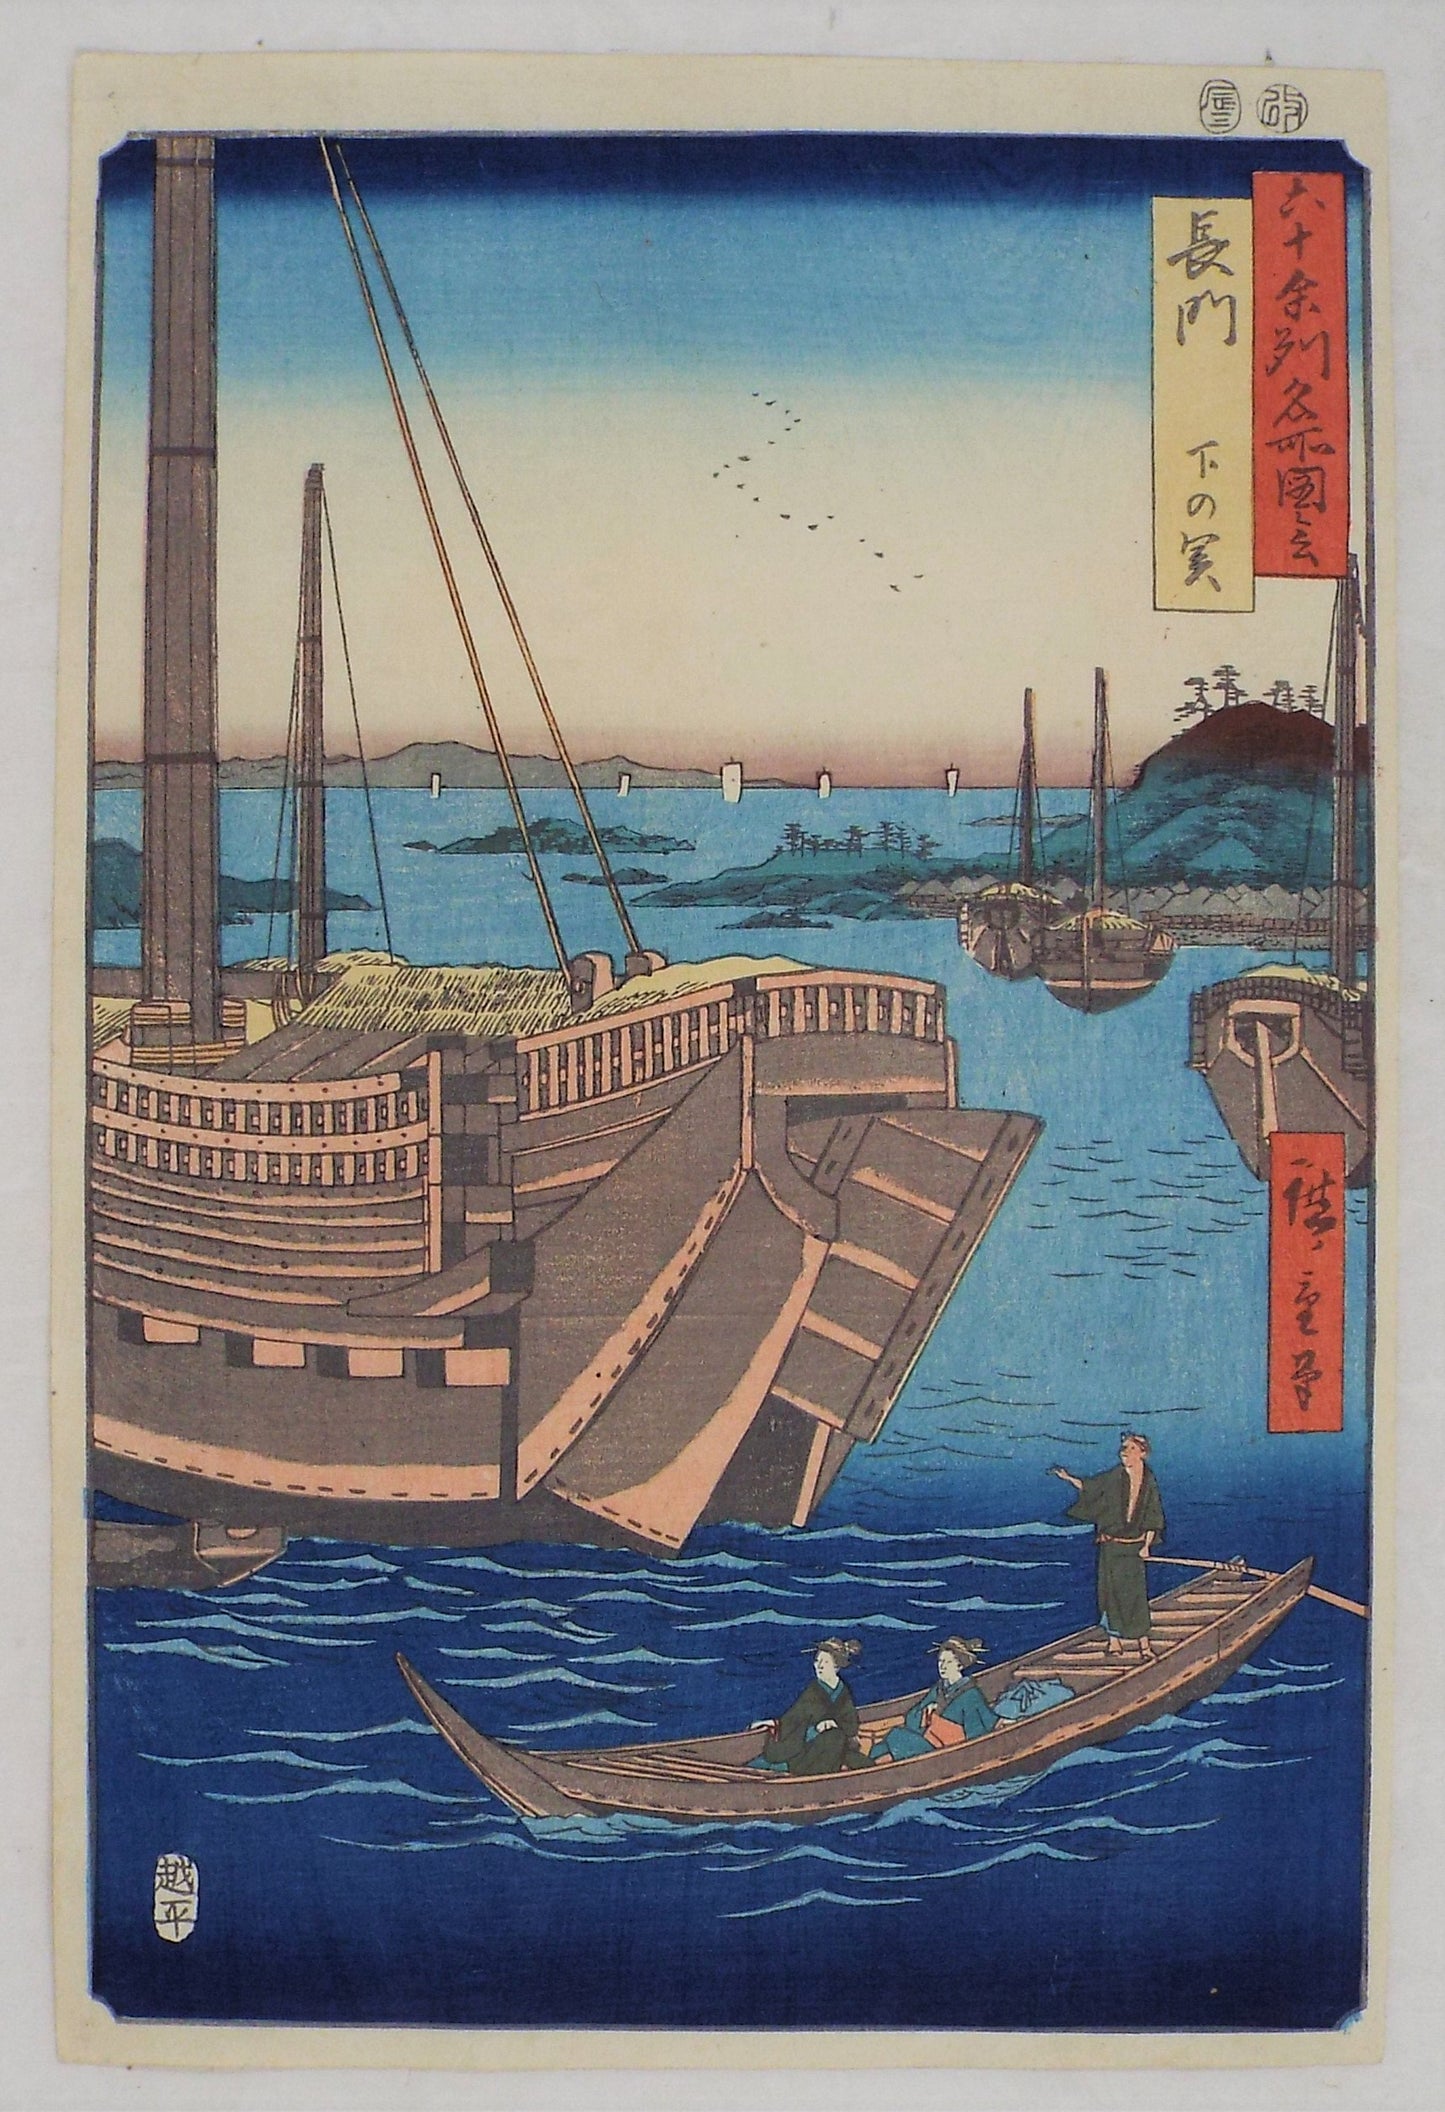 Shimonoseki in the Nagato Province by Hiroshige / Shimonoseki dans la province de Nagato par Hiroshige (1856)